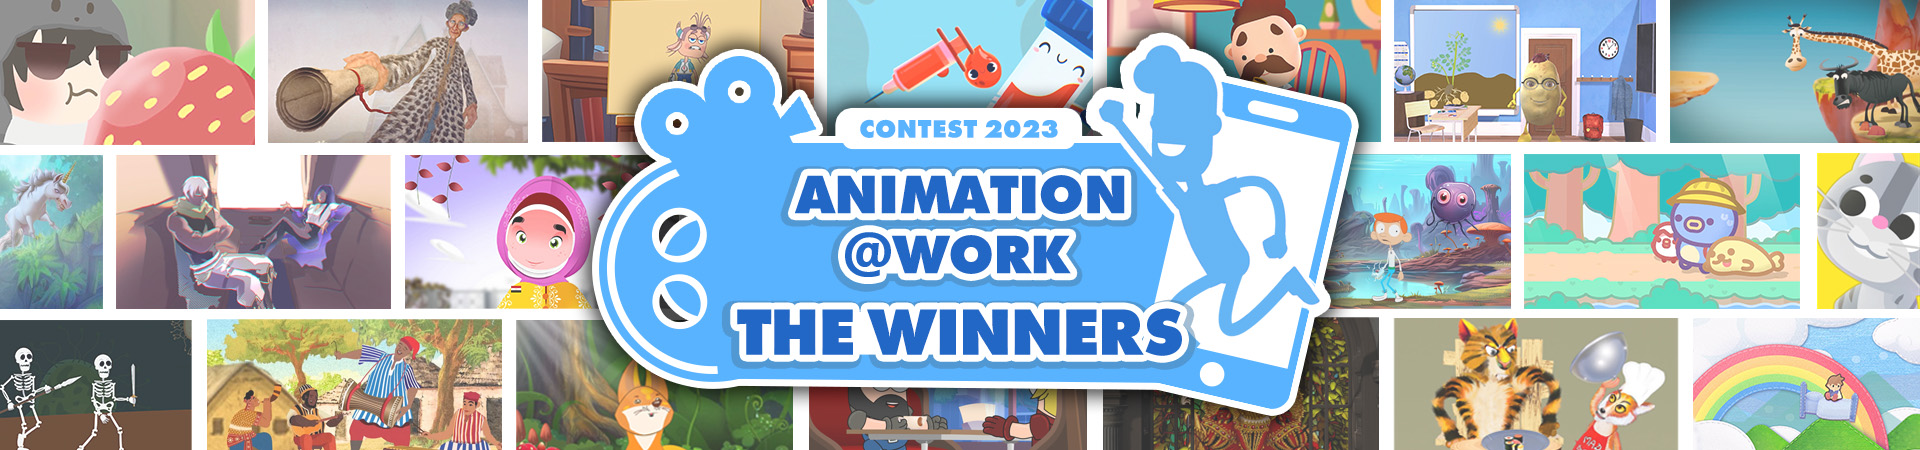 Game Character Animation Contest Winner